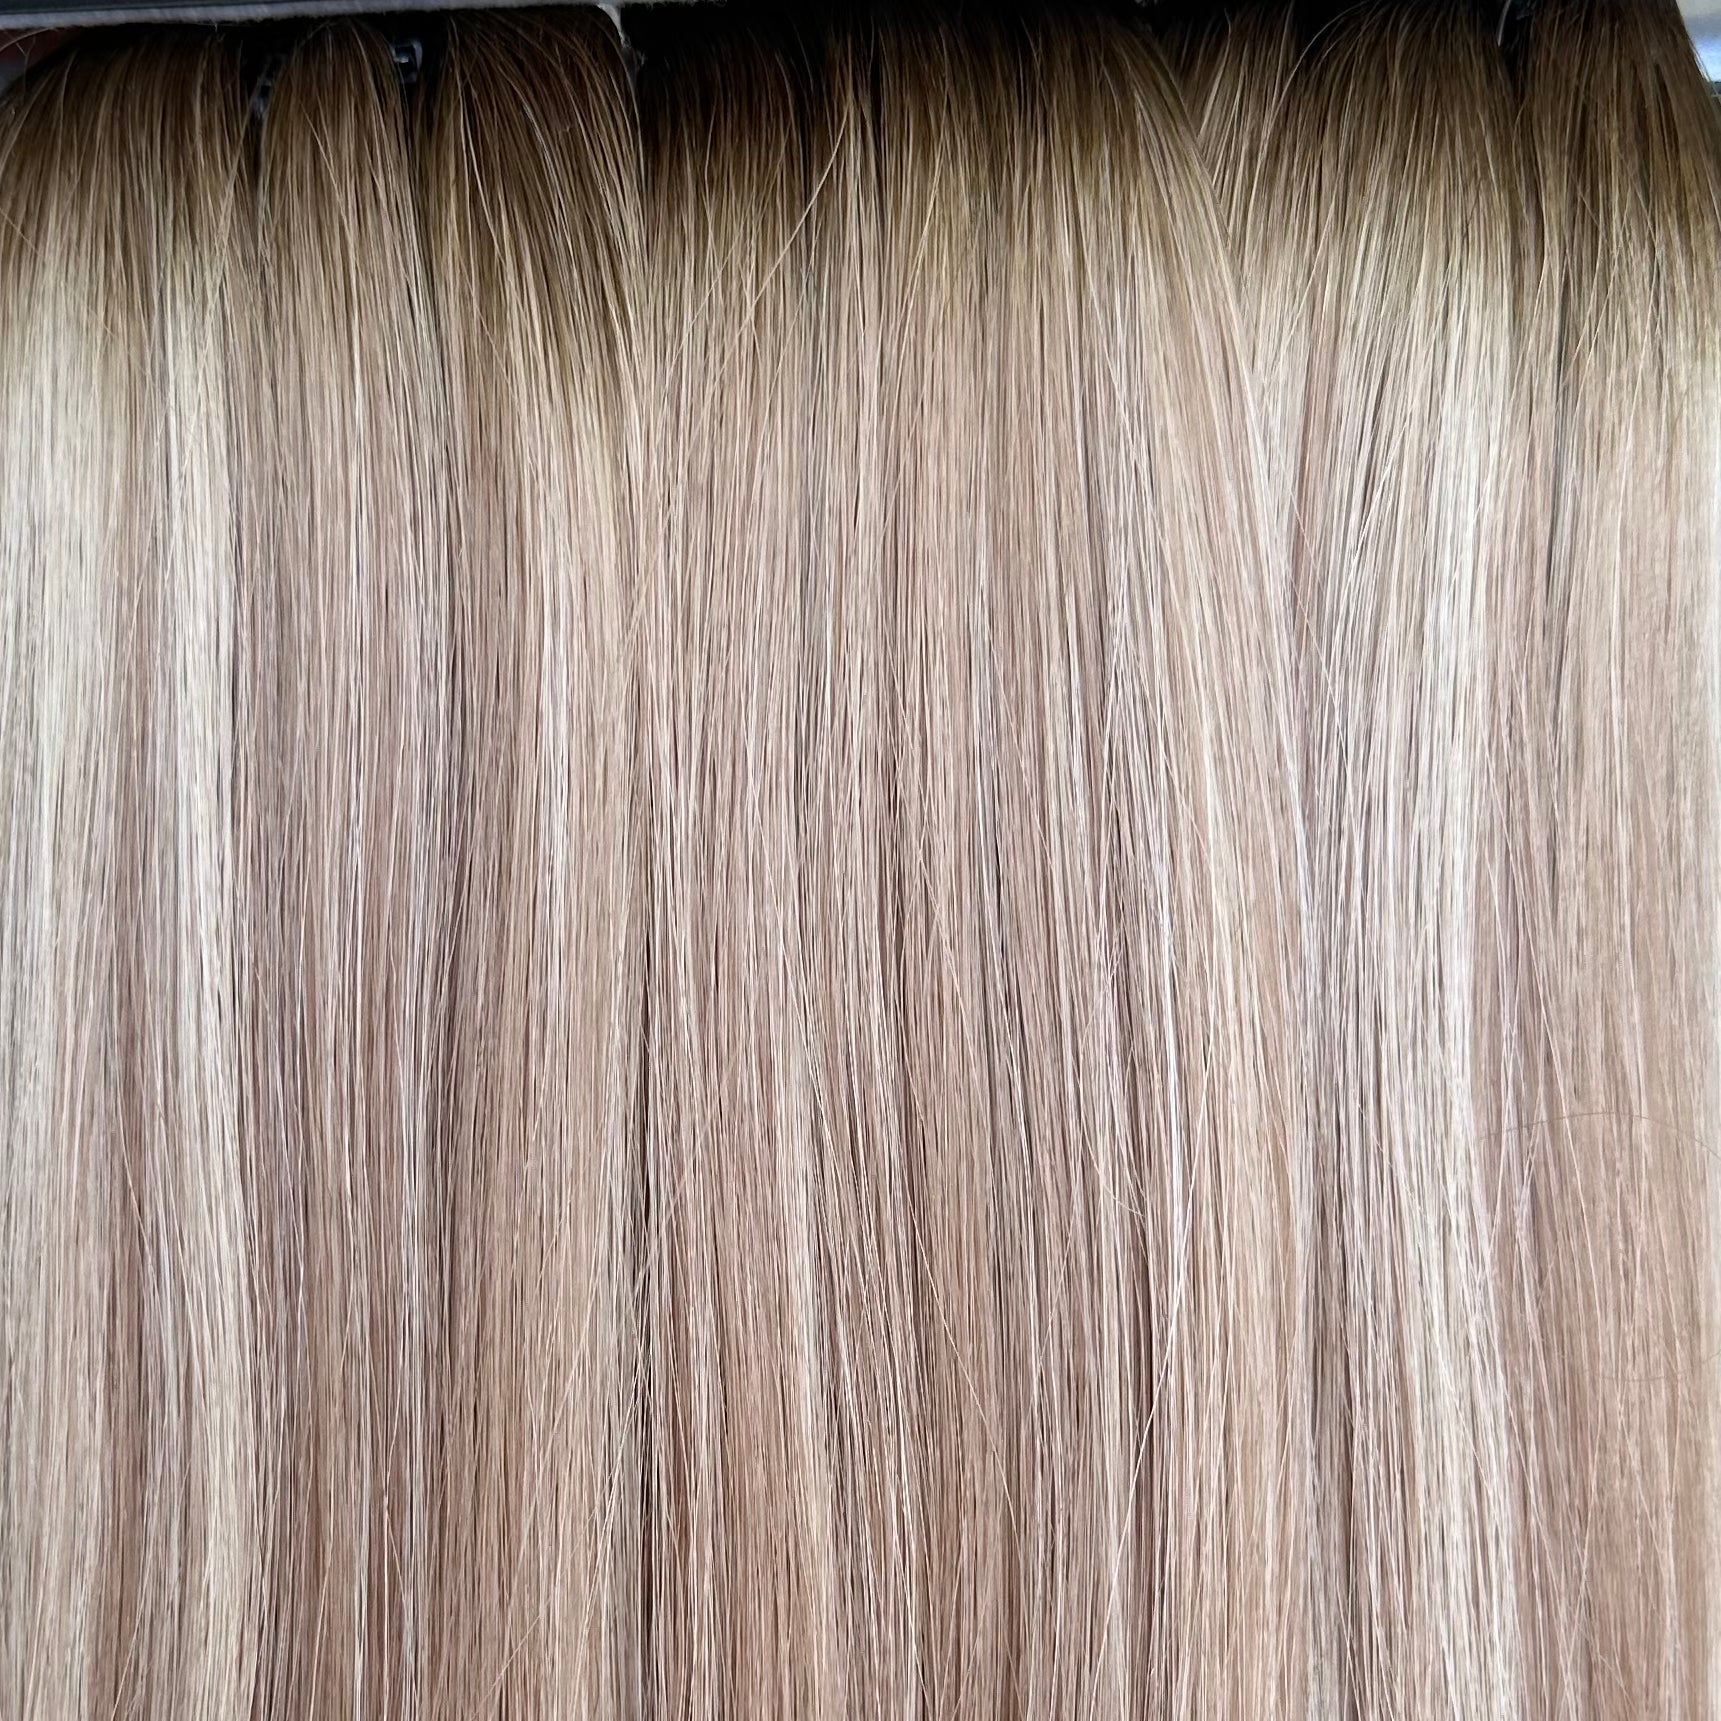 Rooted Beige Blonde Piano - InterMix Wefts